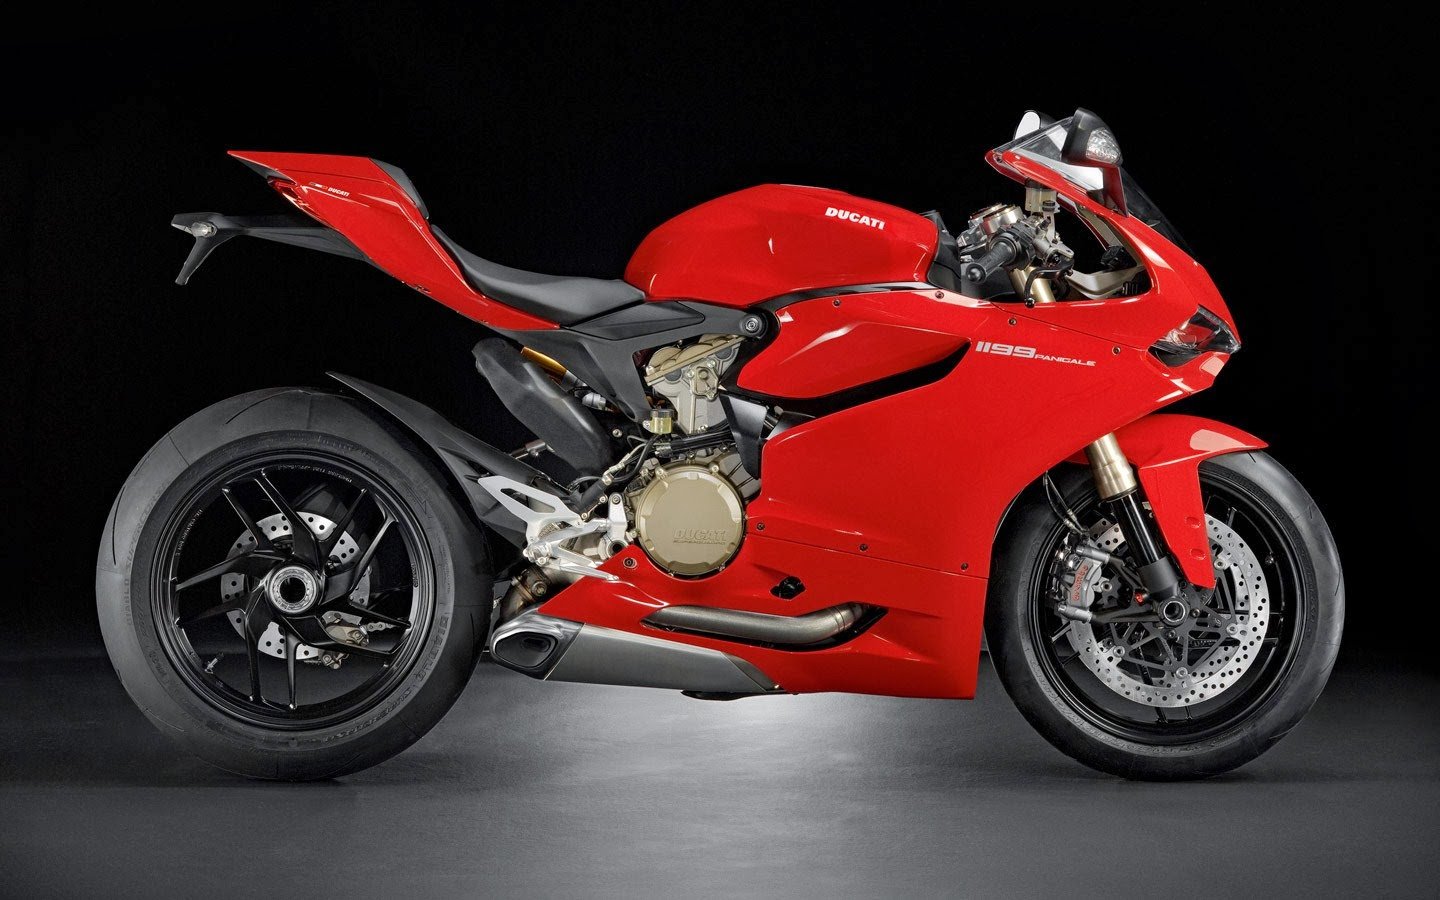  Desktop Background Get Ducati Panigale Wallpaper Photos for your 1440x900